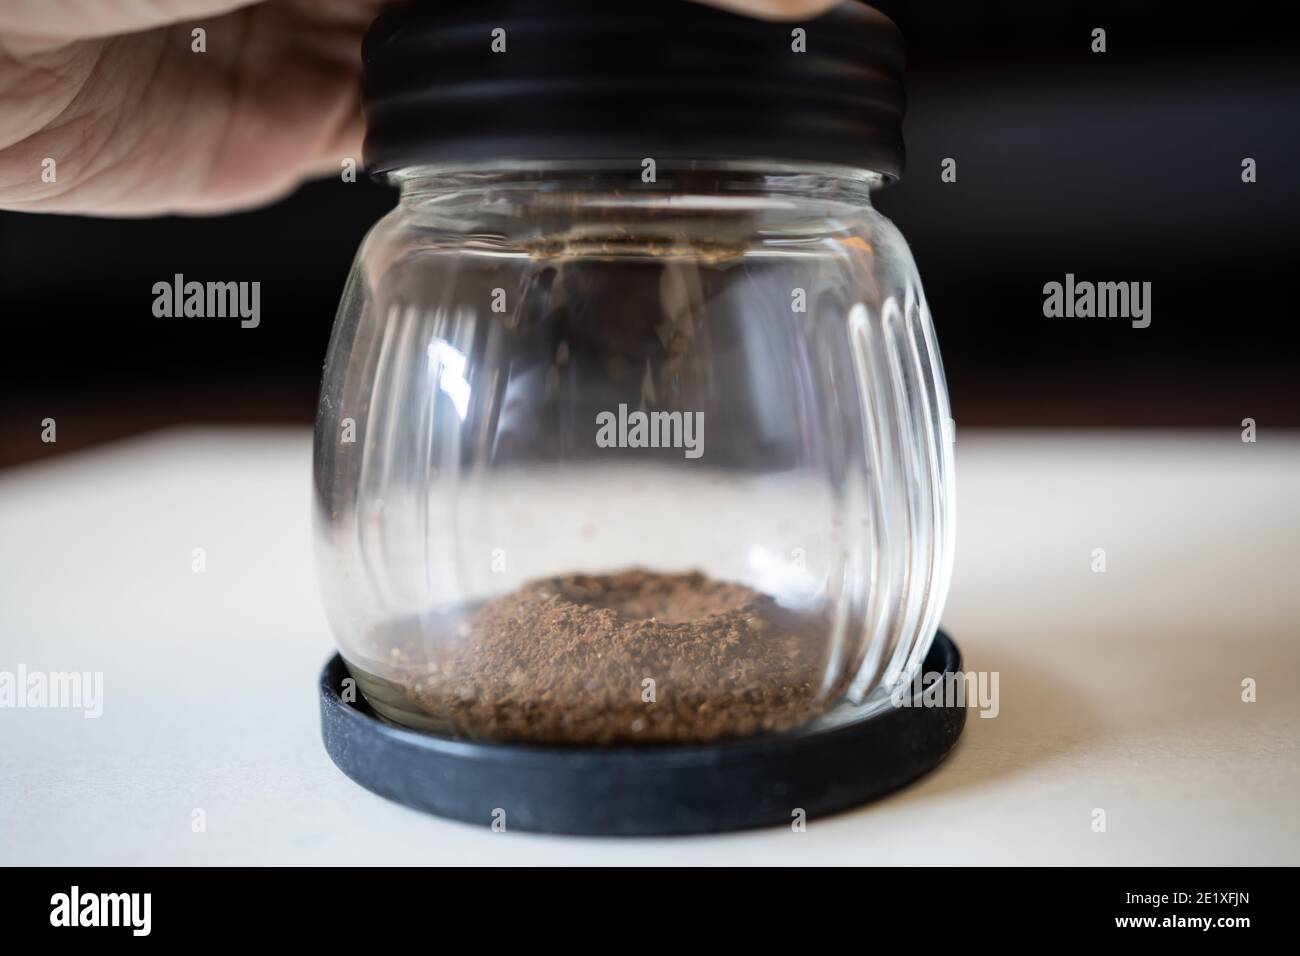 Grinding coffee beans with manual grinder Stock Photo